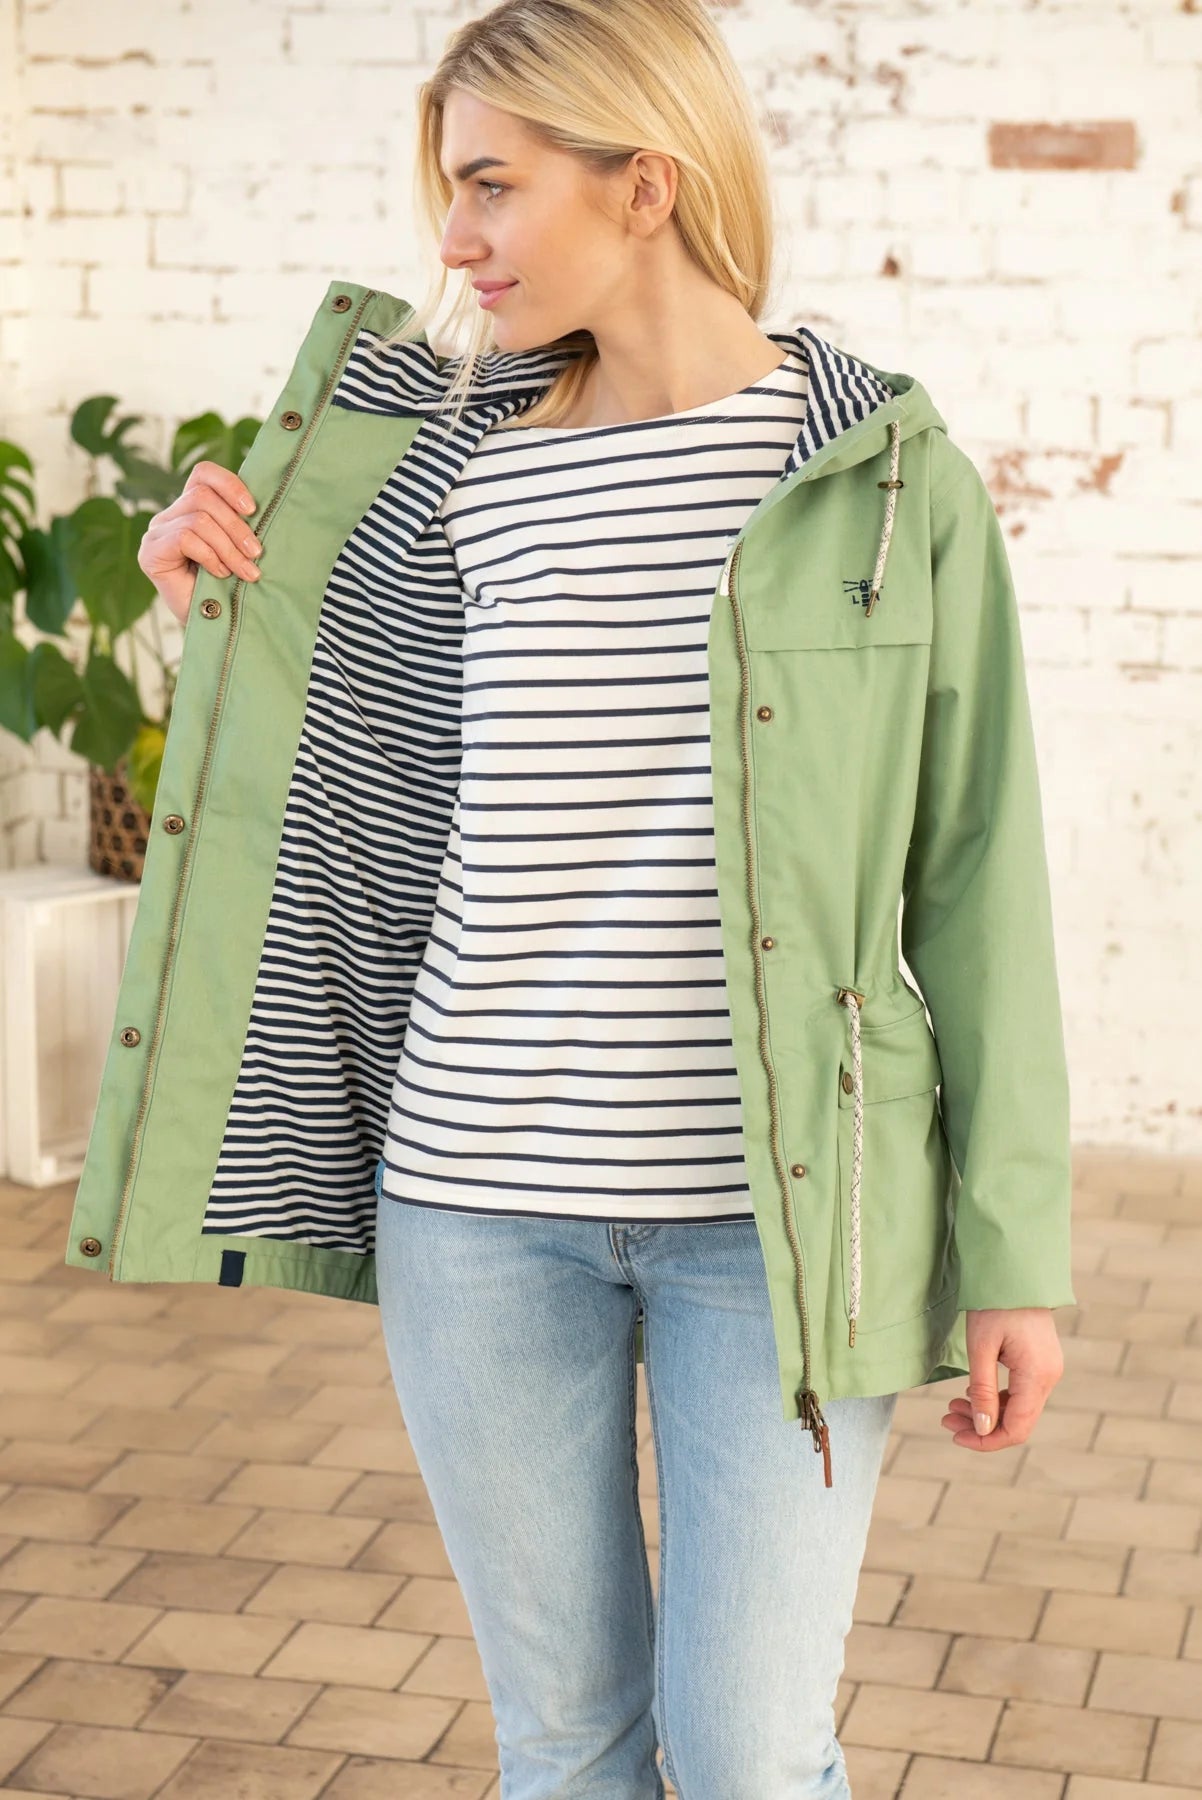 Alicia women's waterproof jacket from Lighthouse in Pistachio Green with white and navy stripe lining.